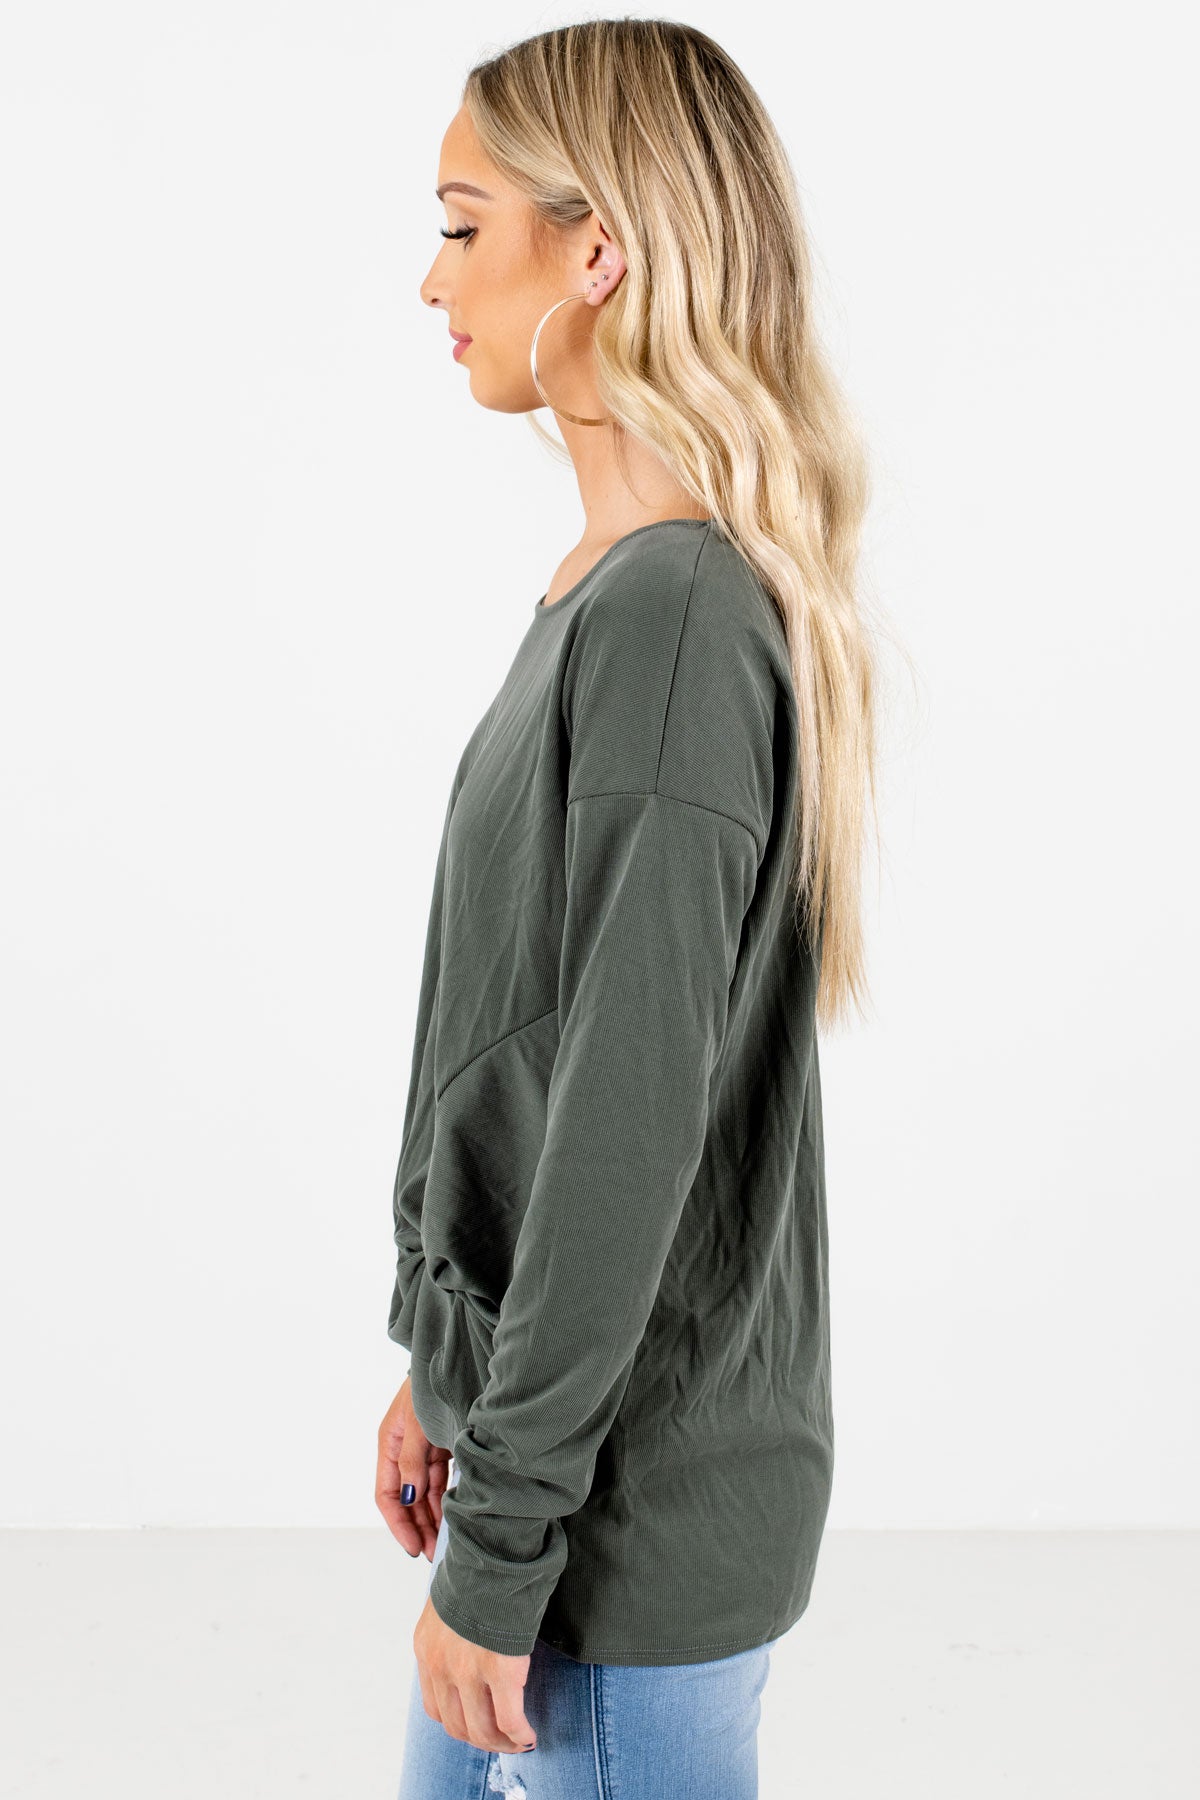 Green Long Sleeve Boutique Tops for Women